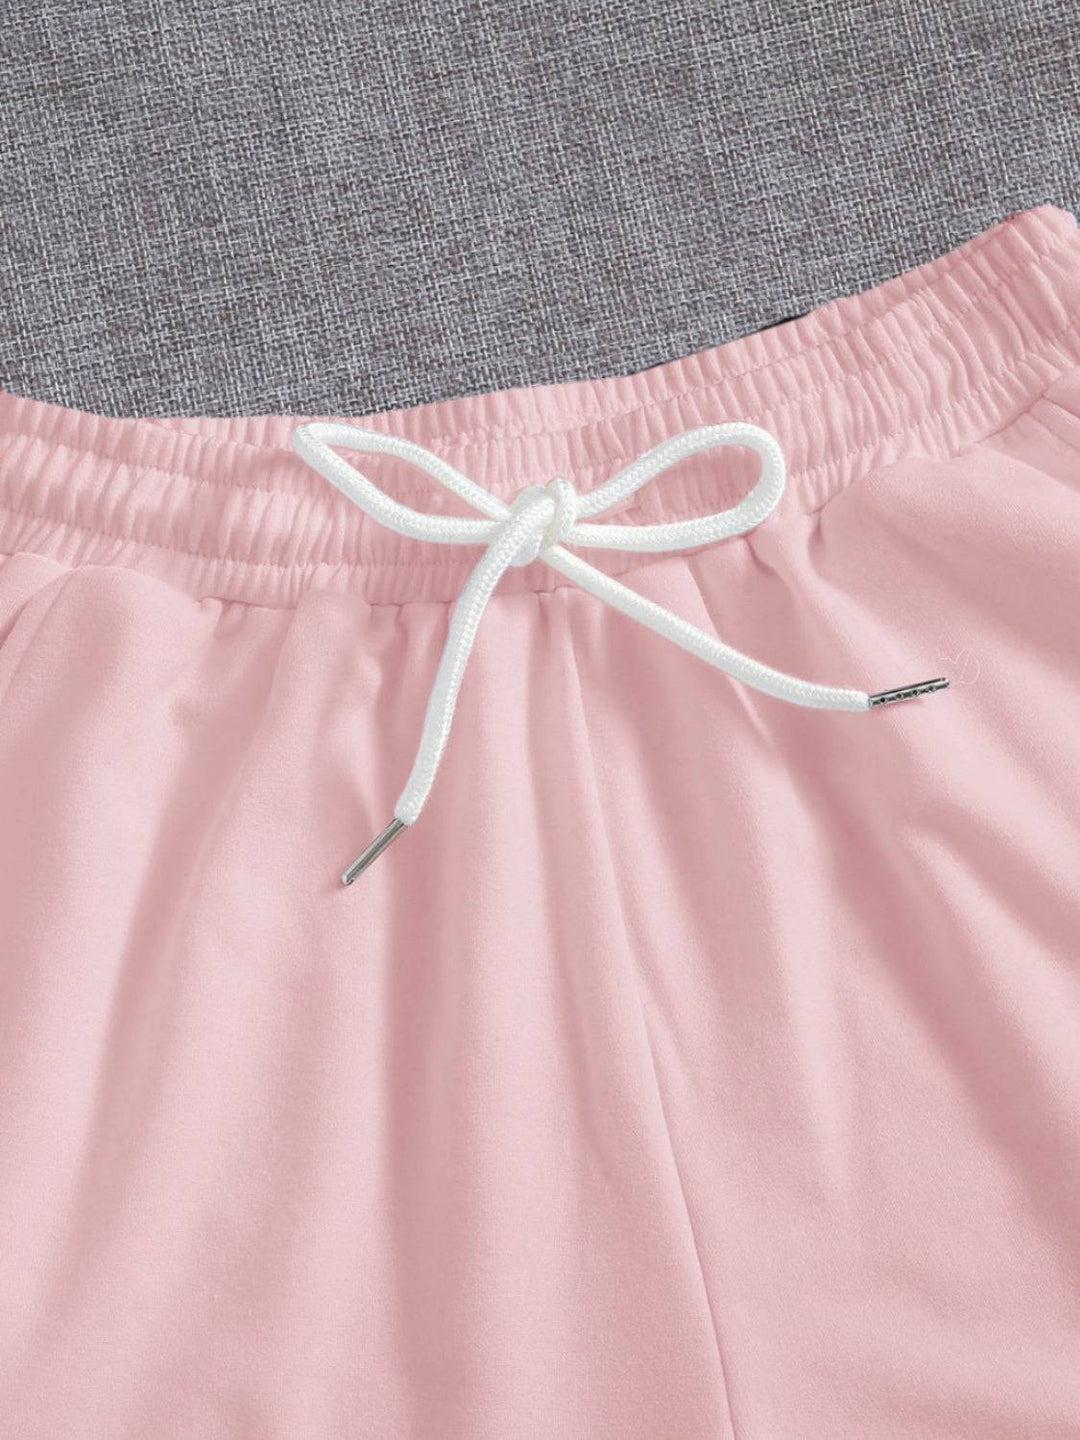 a close up of a pink shorts with a white tie